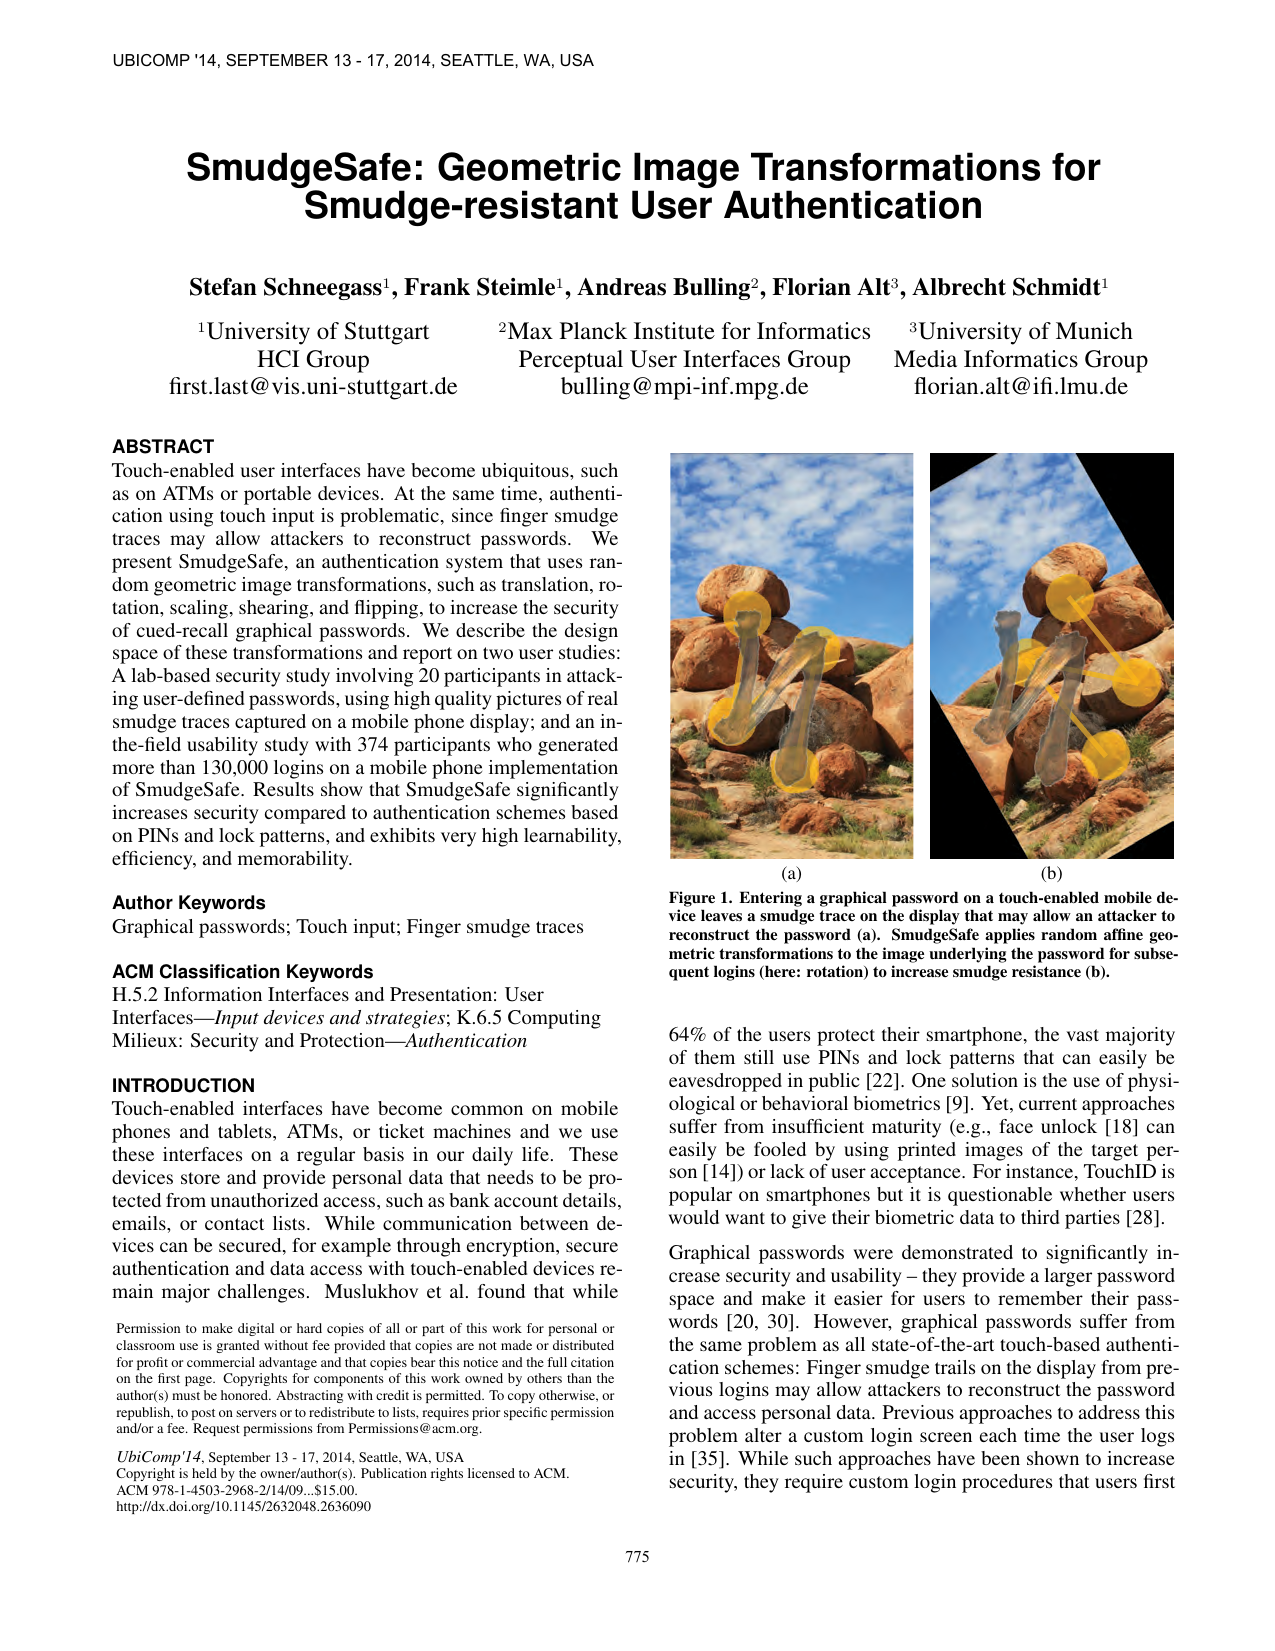 SmudgeSafe: Geometric Image Transformations for Smudge-resistant User Authentication